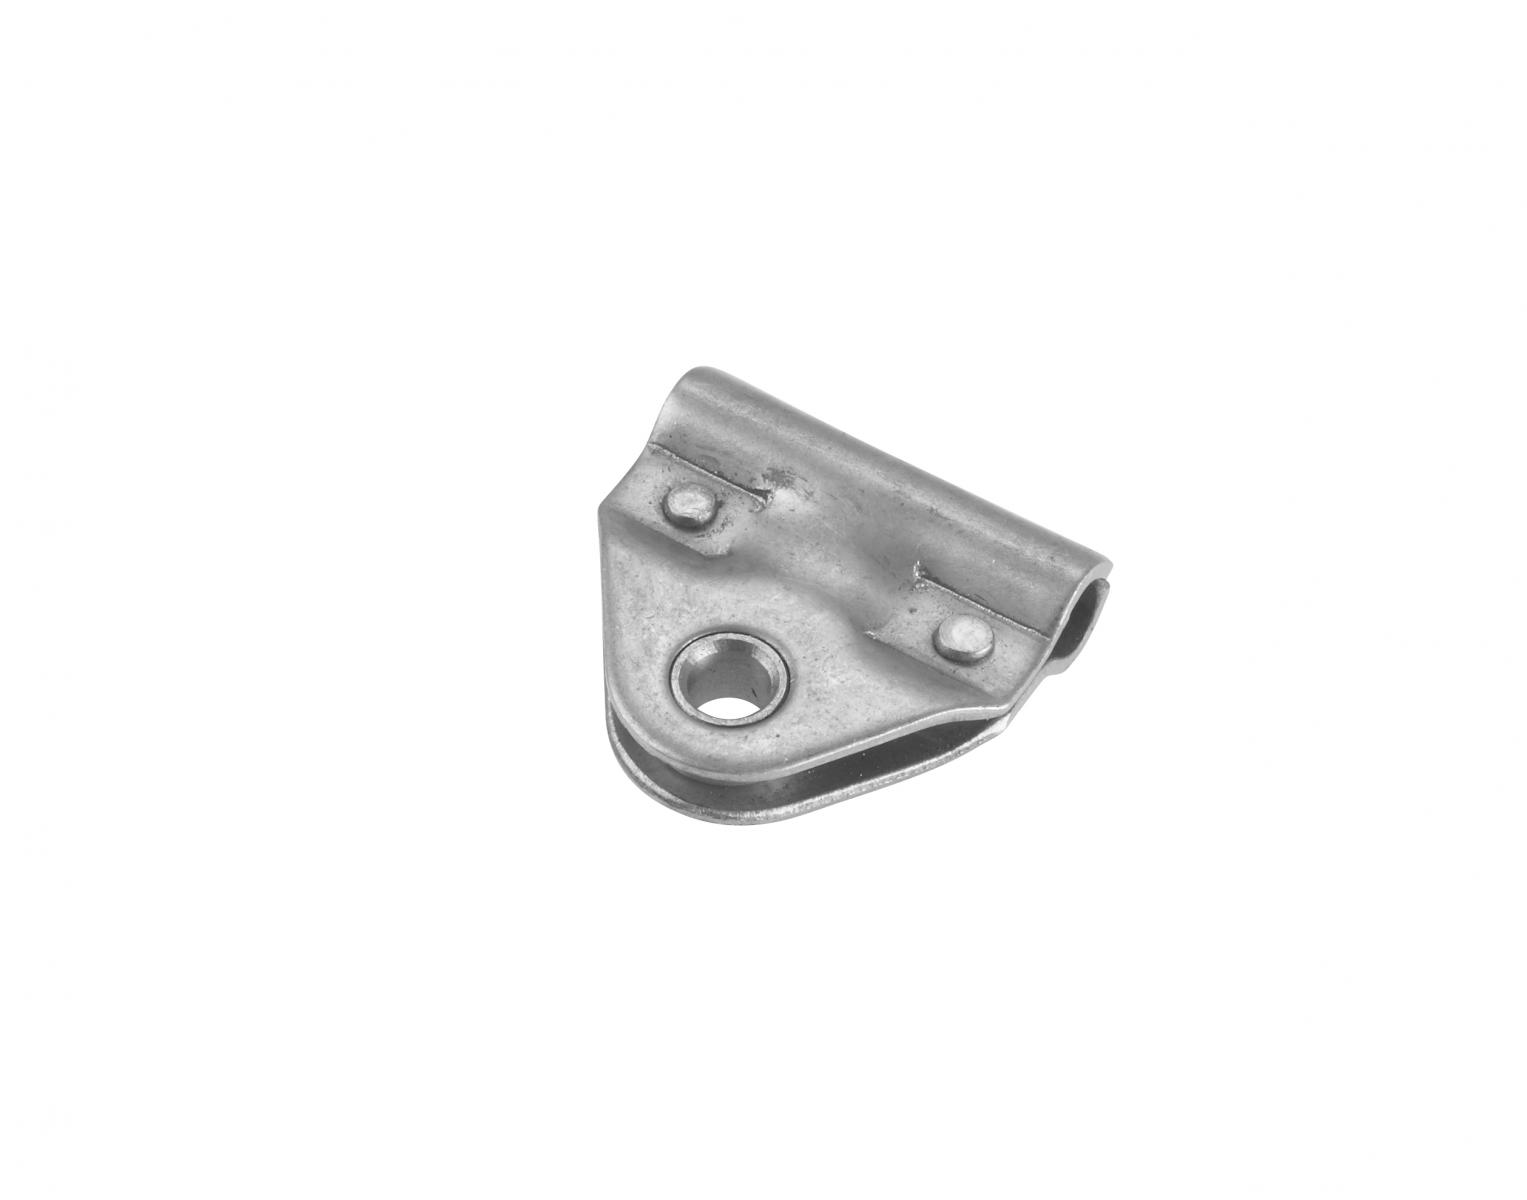 TapeTech® Swivel Assembly. Part number 154007